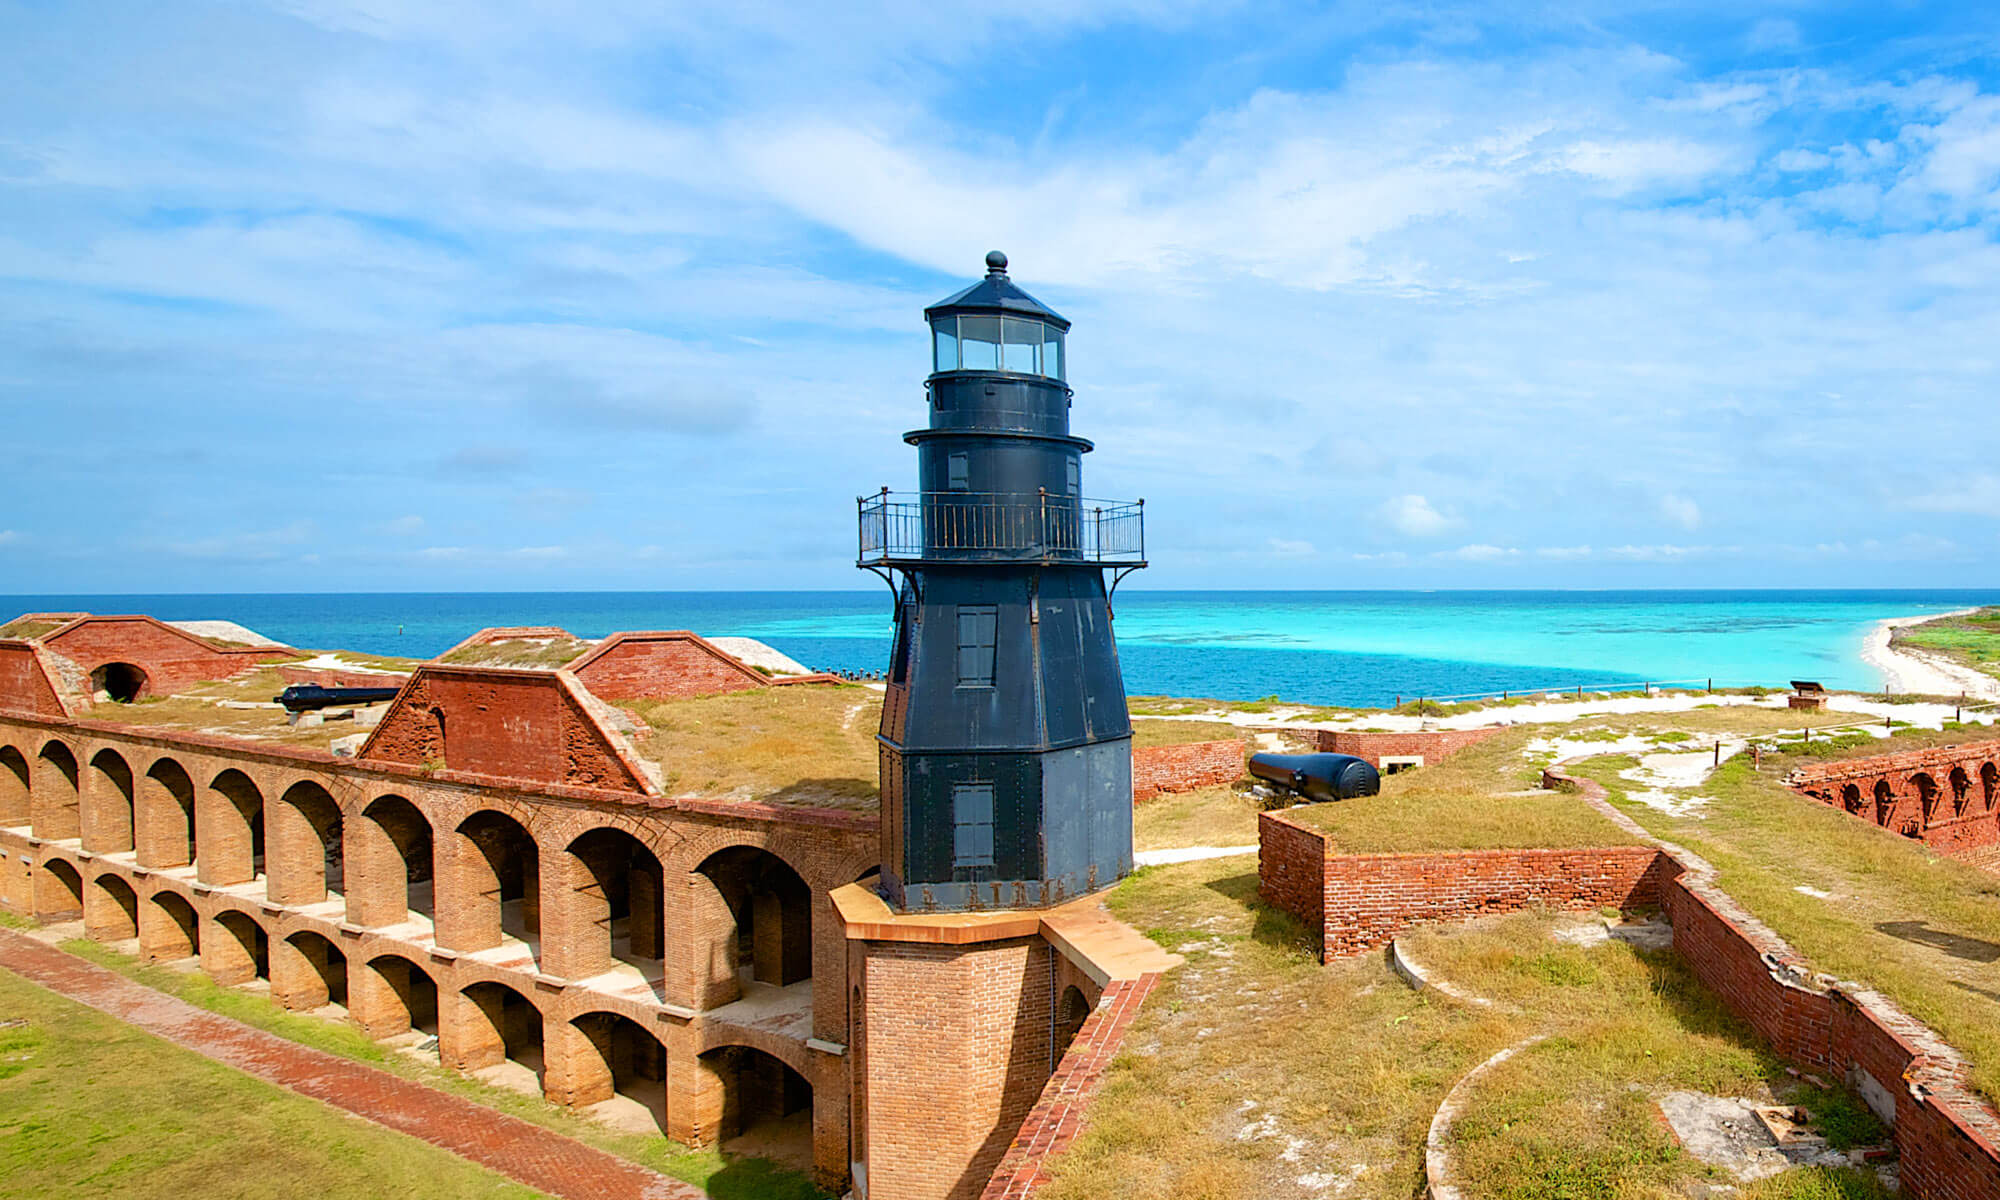 View of Fort Jefferson overlooking the ocean from behind the lighthouse at Dry Tortugas National Park